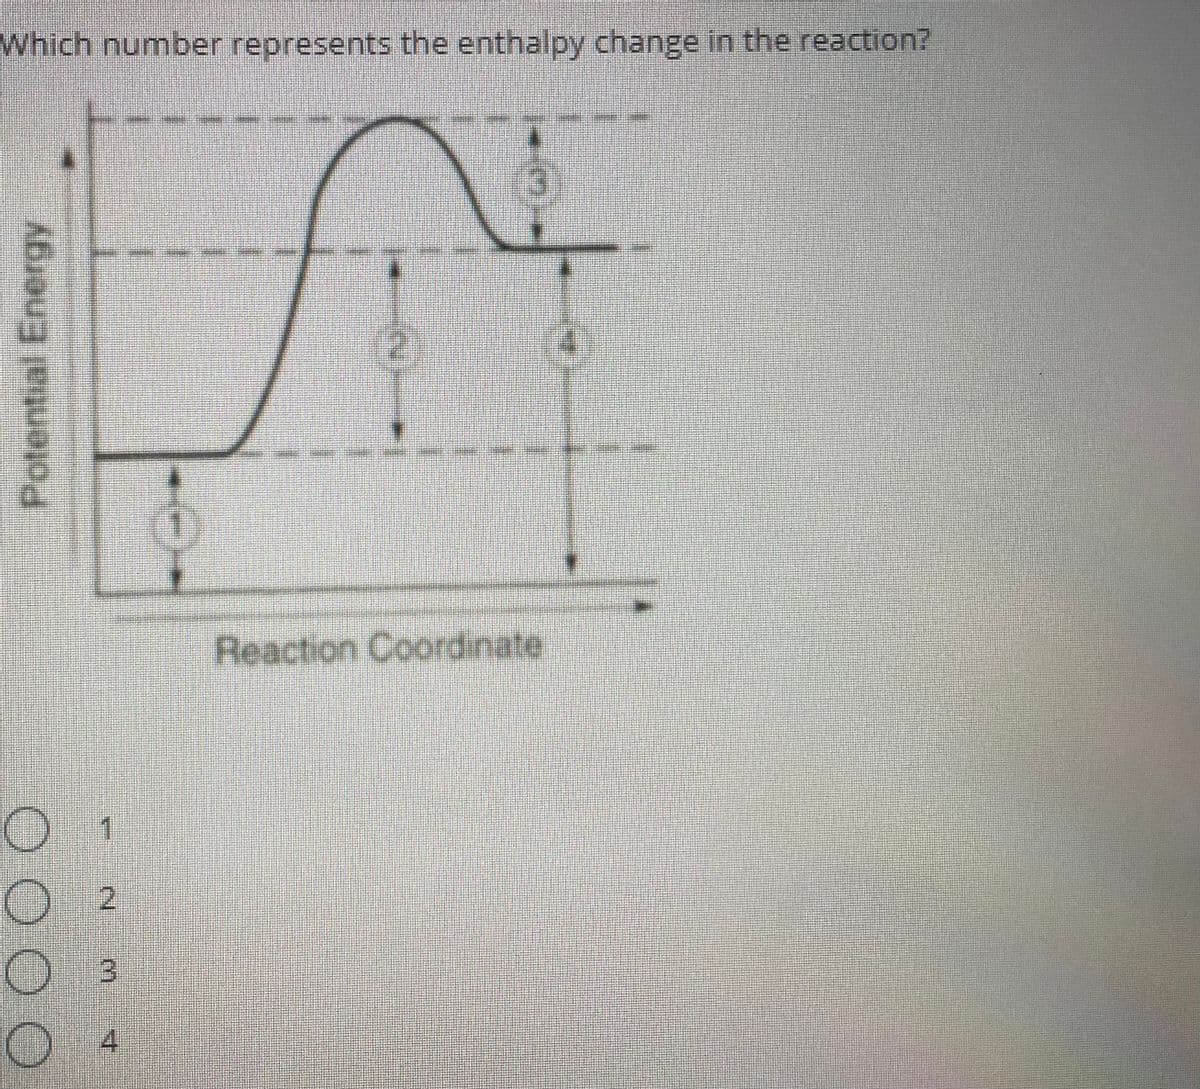 Which number represents the enthalpy change in the reaction?
Reaction Coordinate
2
.
3)
4
Potential Energy
